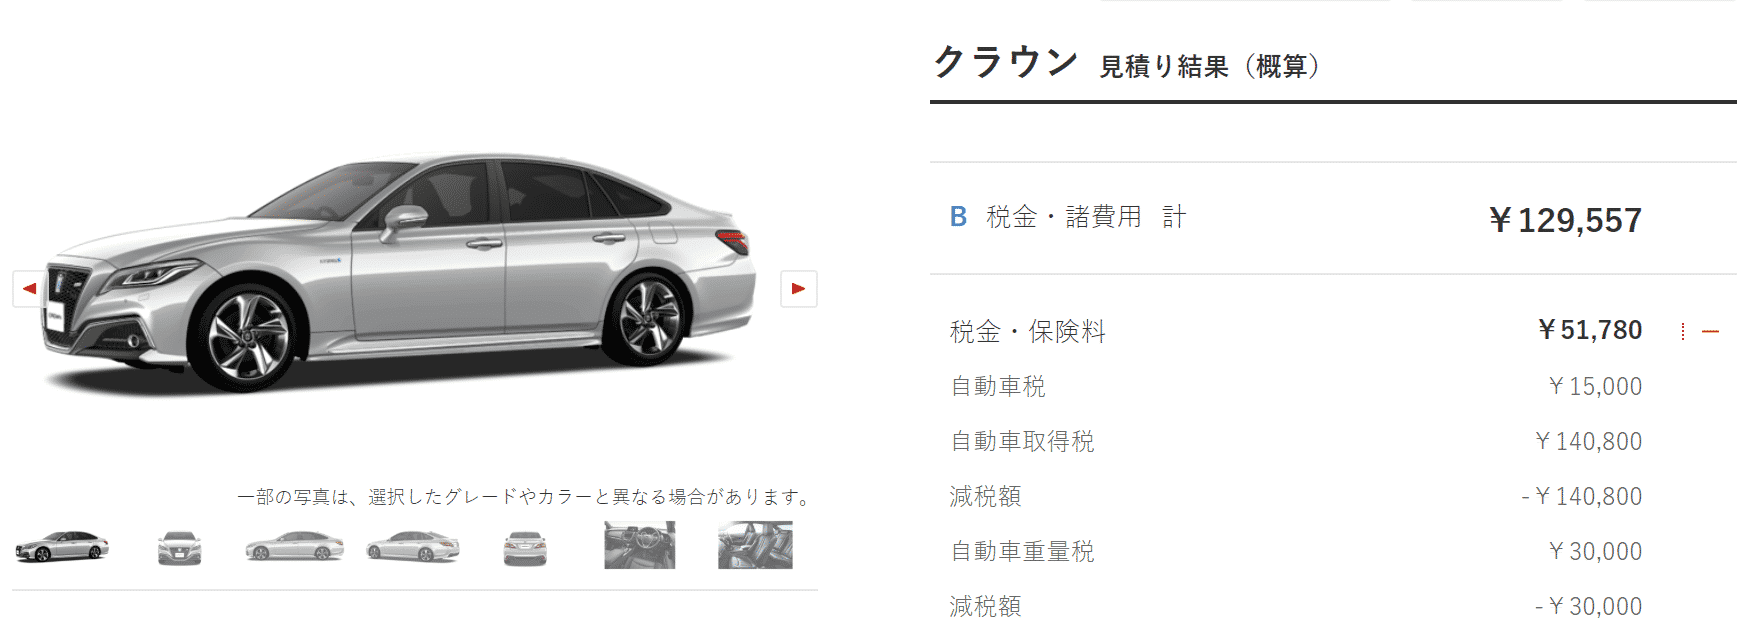 「2.5 RS Four」の税額画像